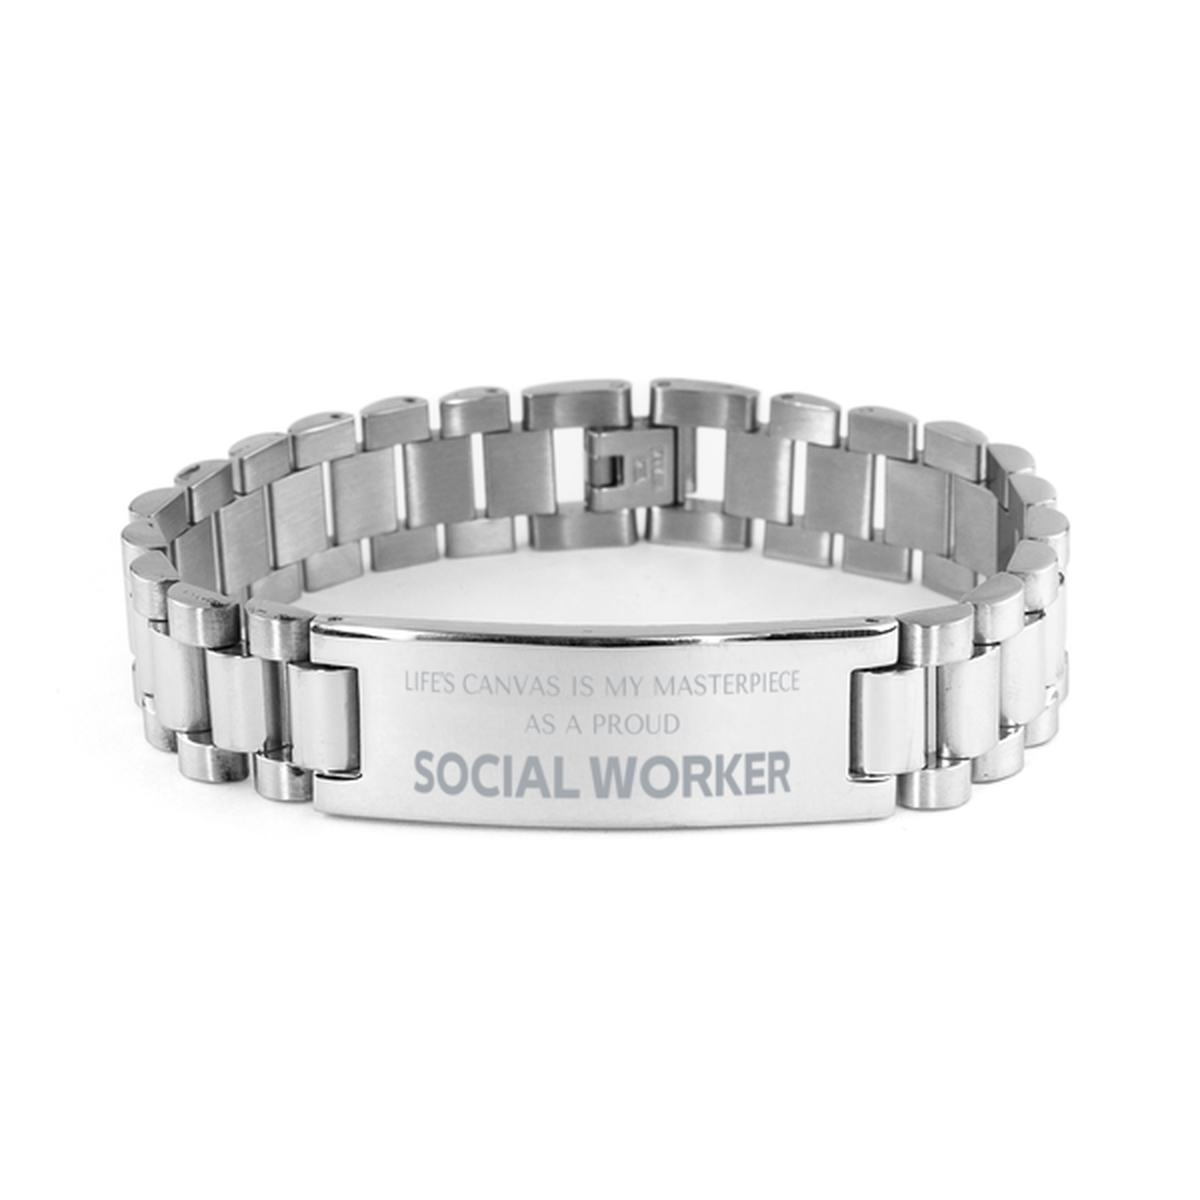 Proud Social Worker Gifts, Life's canvas is my masterpiece, Epic Birthday Christmas Unique Ladder Stainless Steel Bracelet For Social Worker, Coworkers, Men, Women, Friends